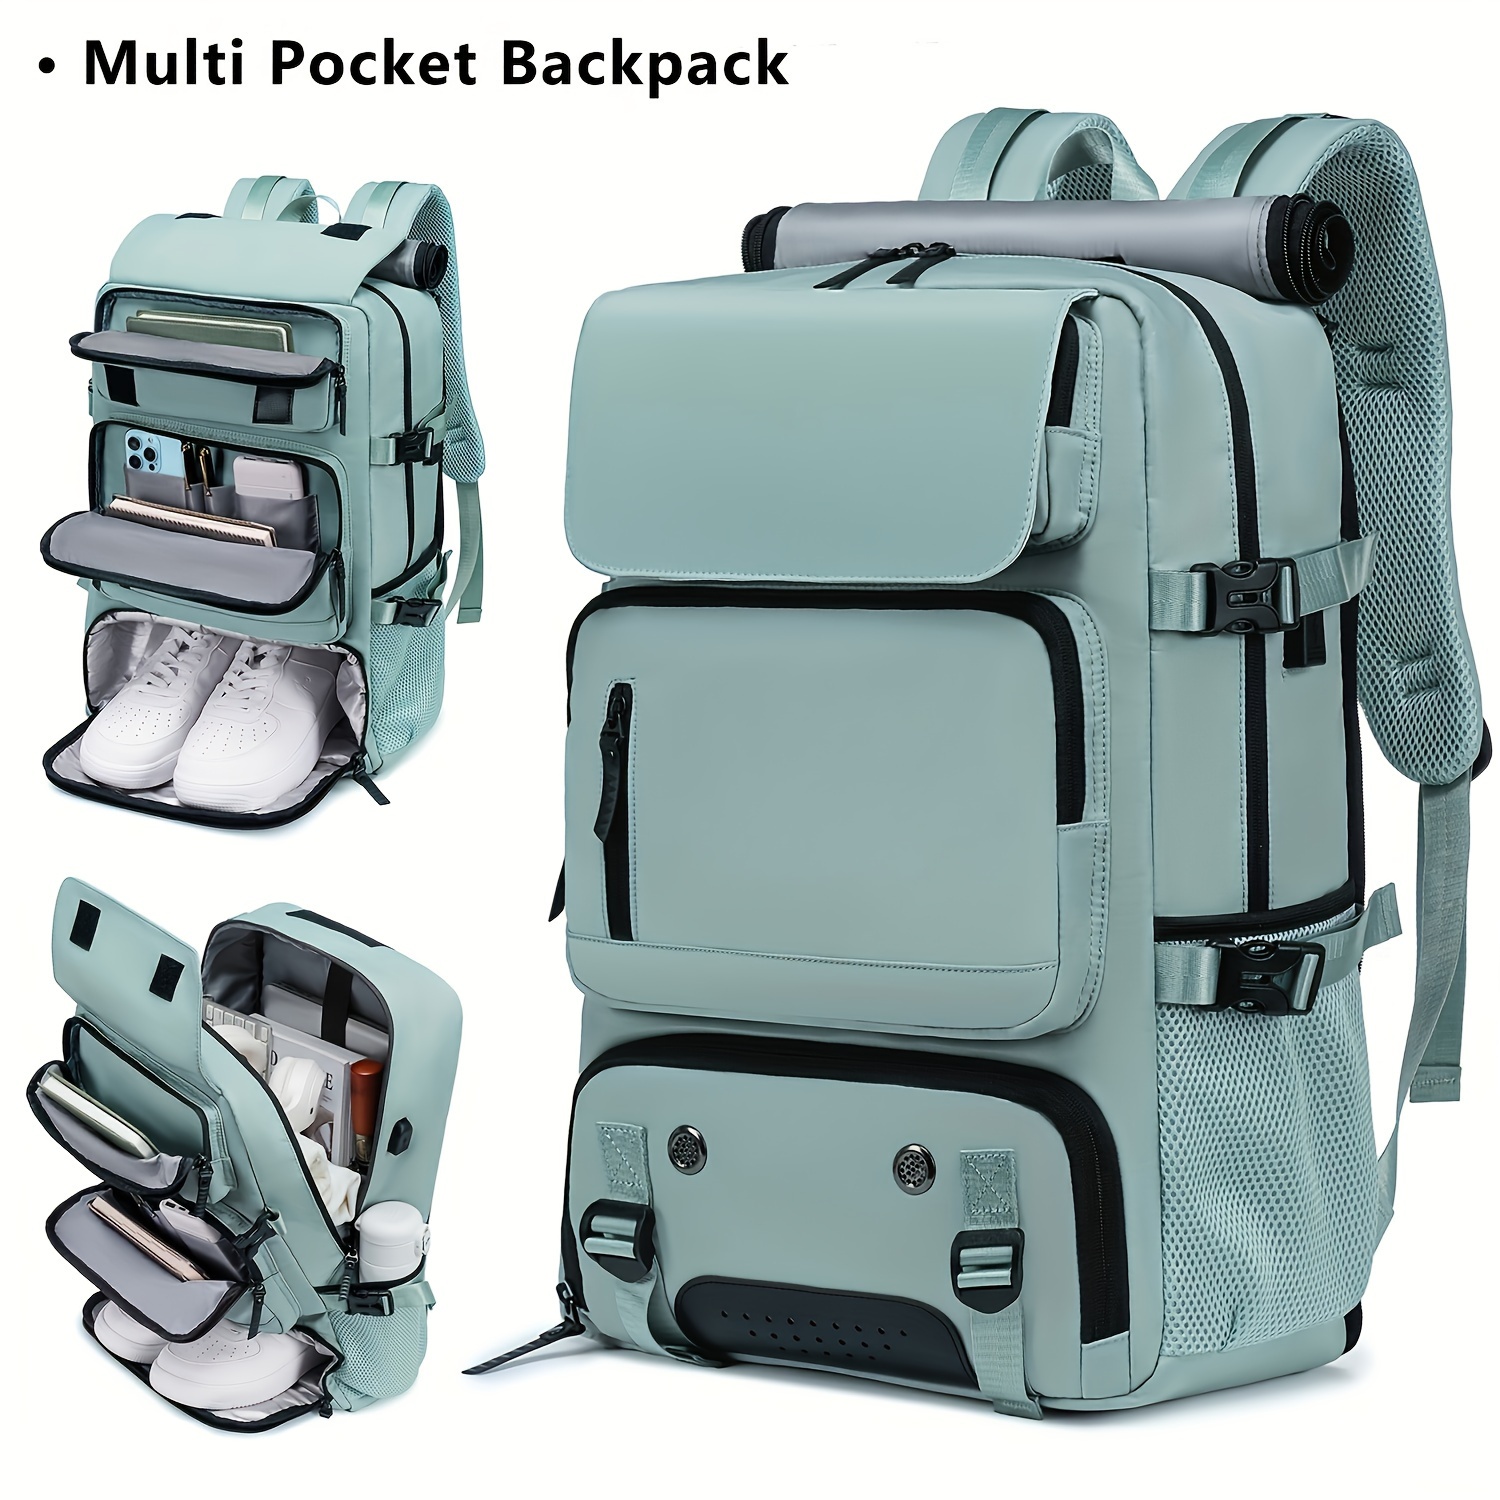 

Multi-functional Large Capacity Backpack For Man Women, Hiking & Camping, Waterproof Outdoor Knapsack With Shoes Compartment & Usb Charging Port, Business Laptop College Bag, Ideal Gifts